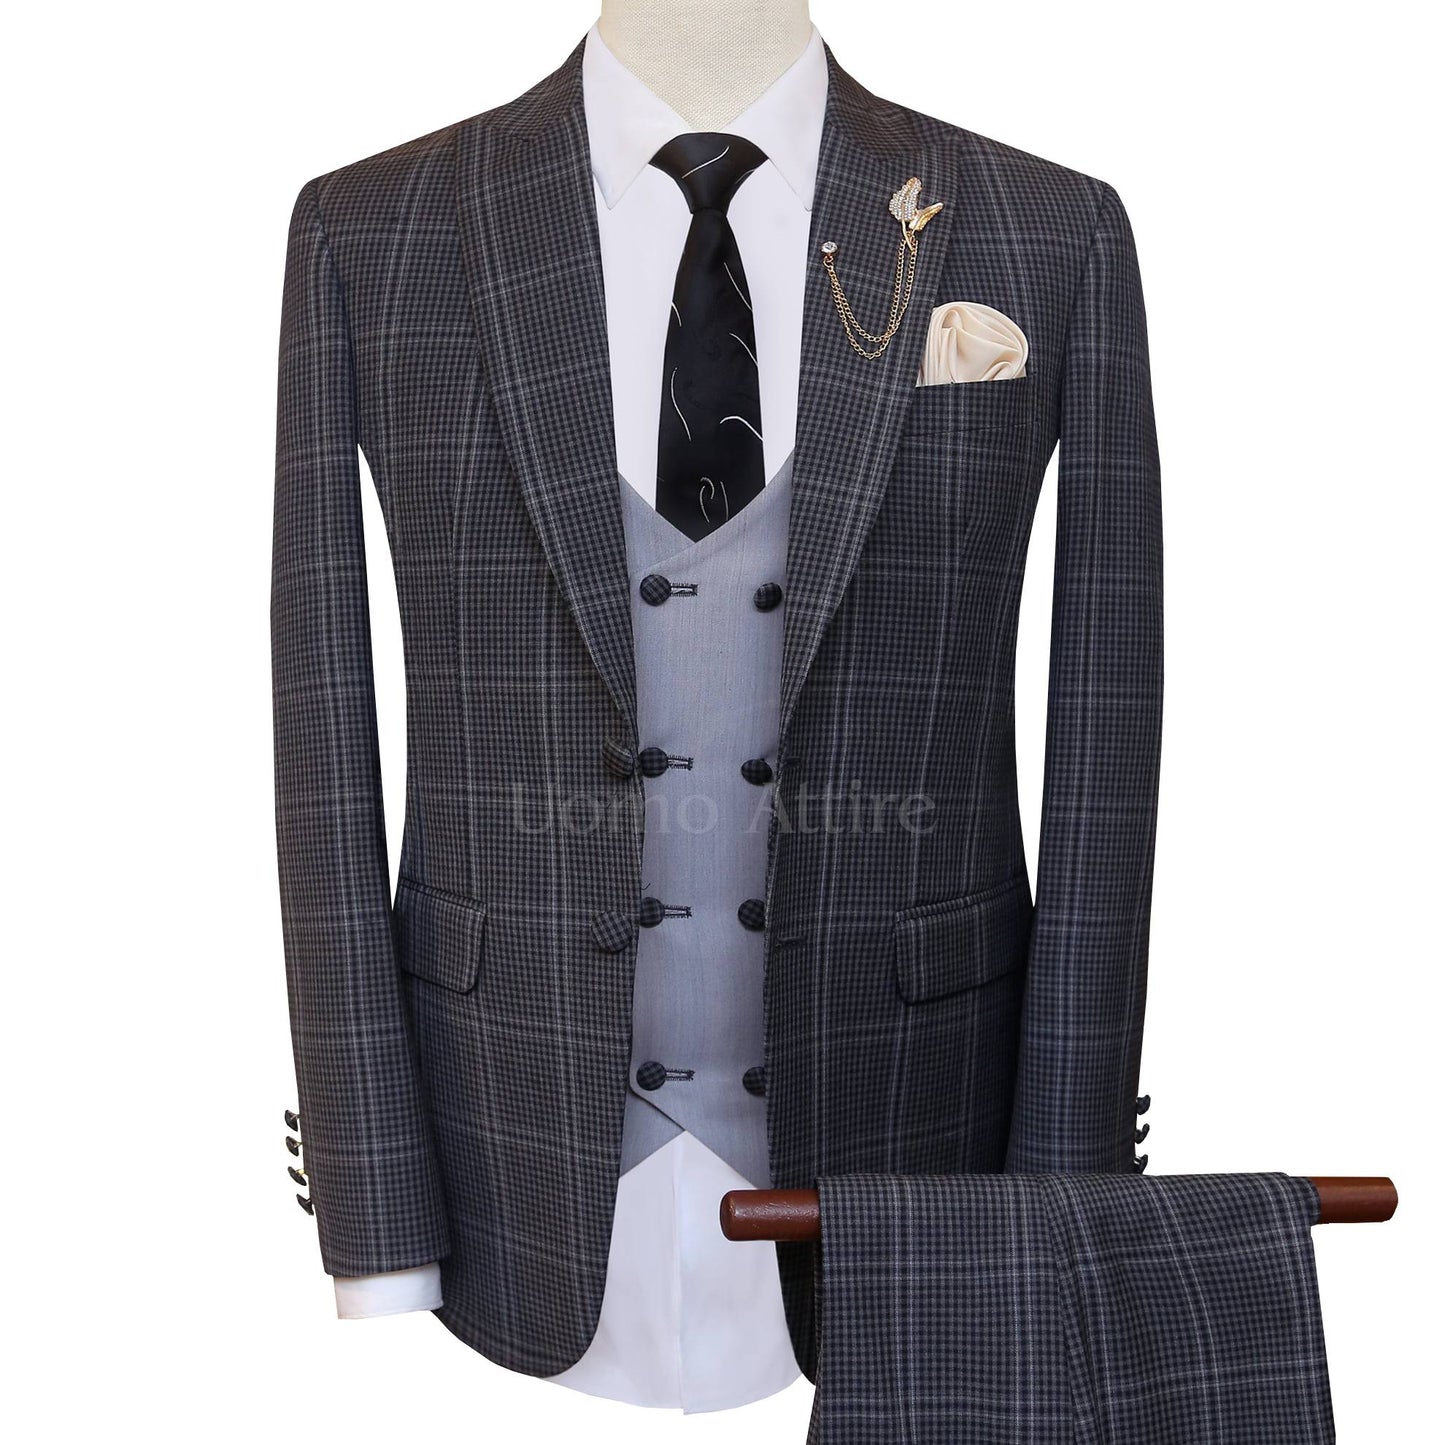 Tropical windowpane with mini check customized three piece suit